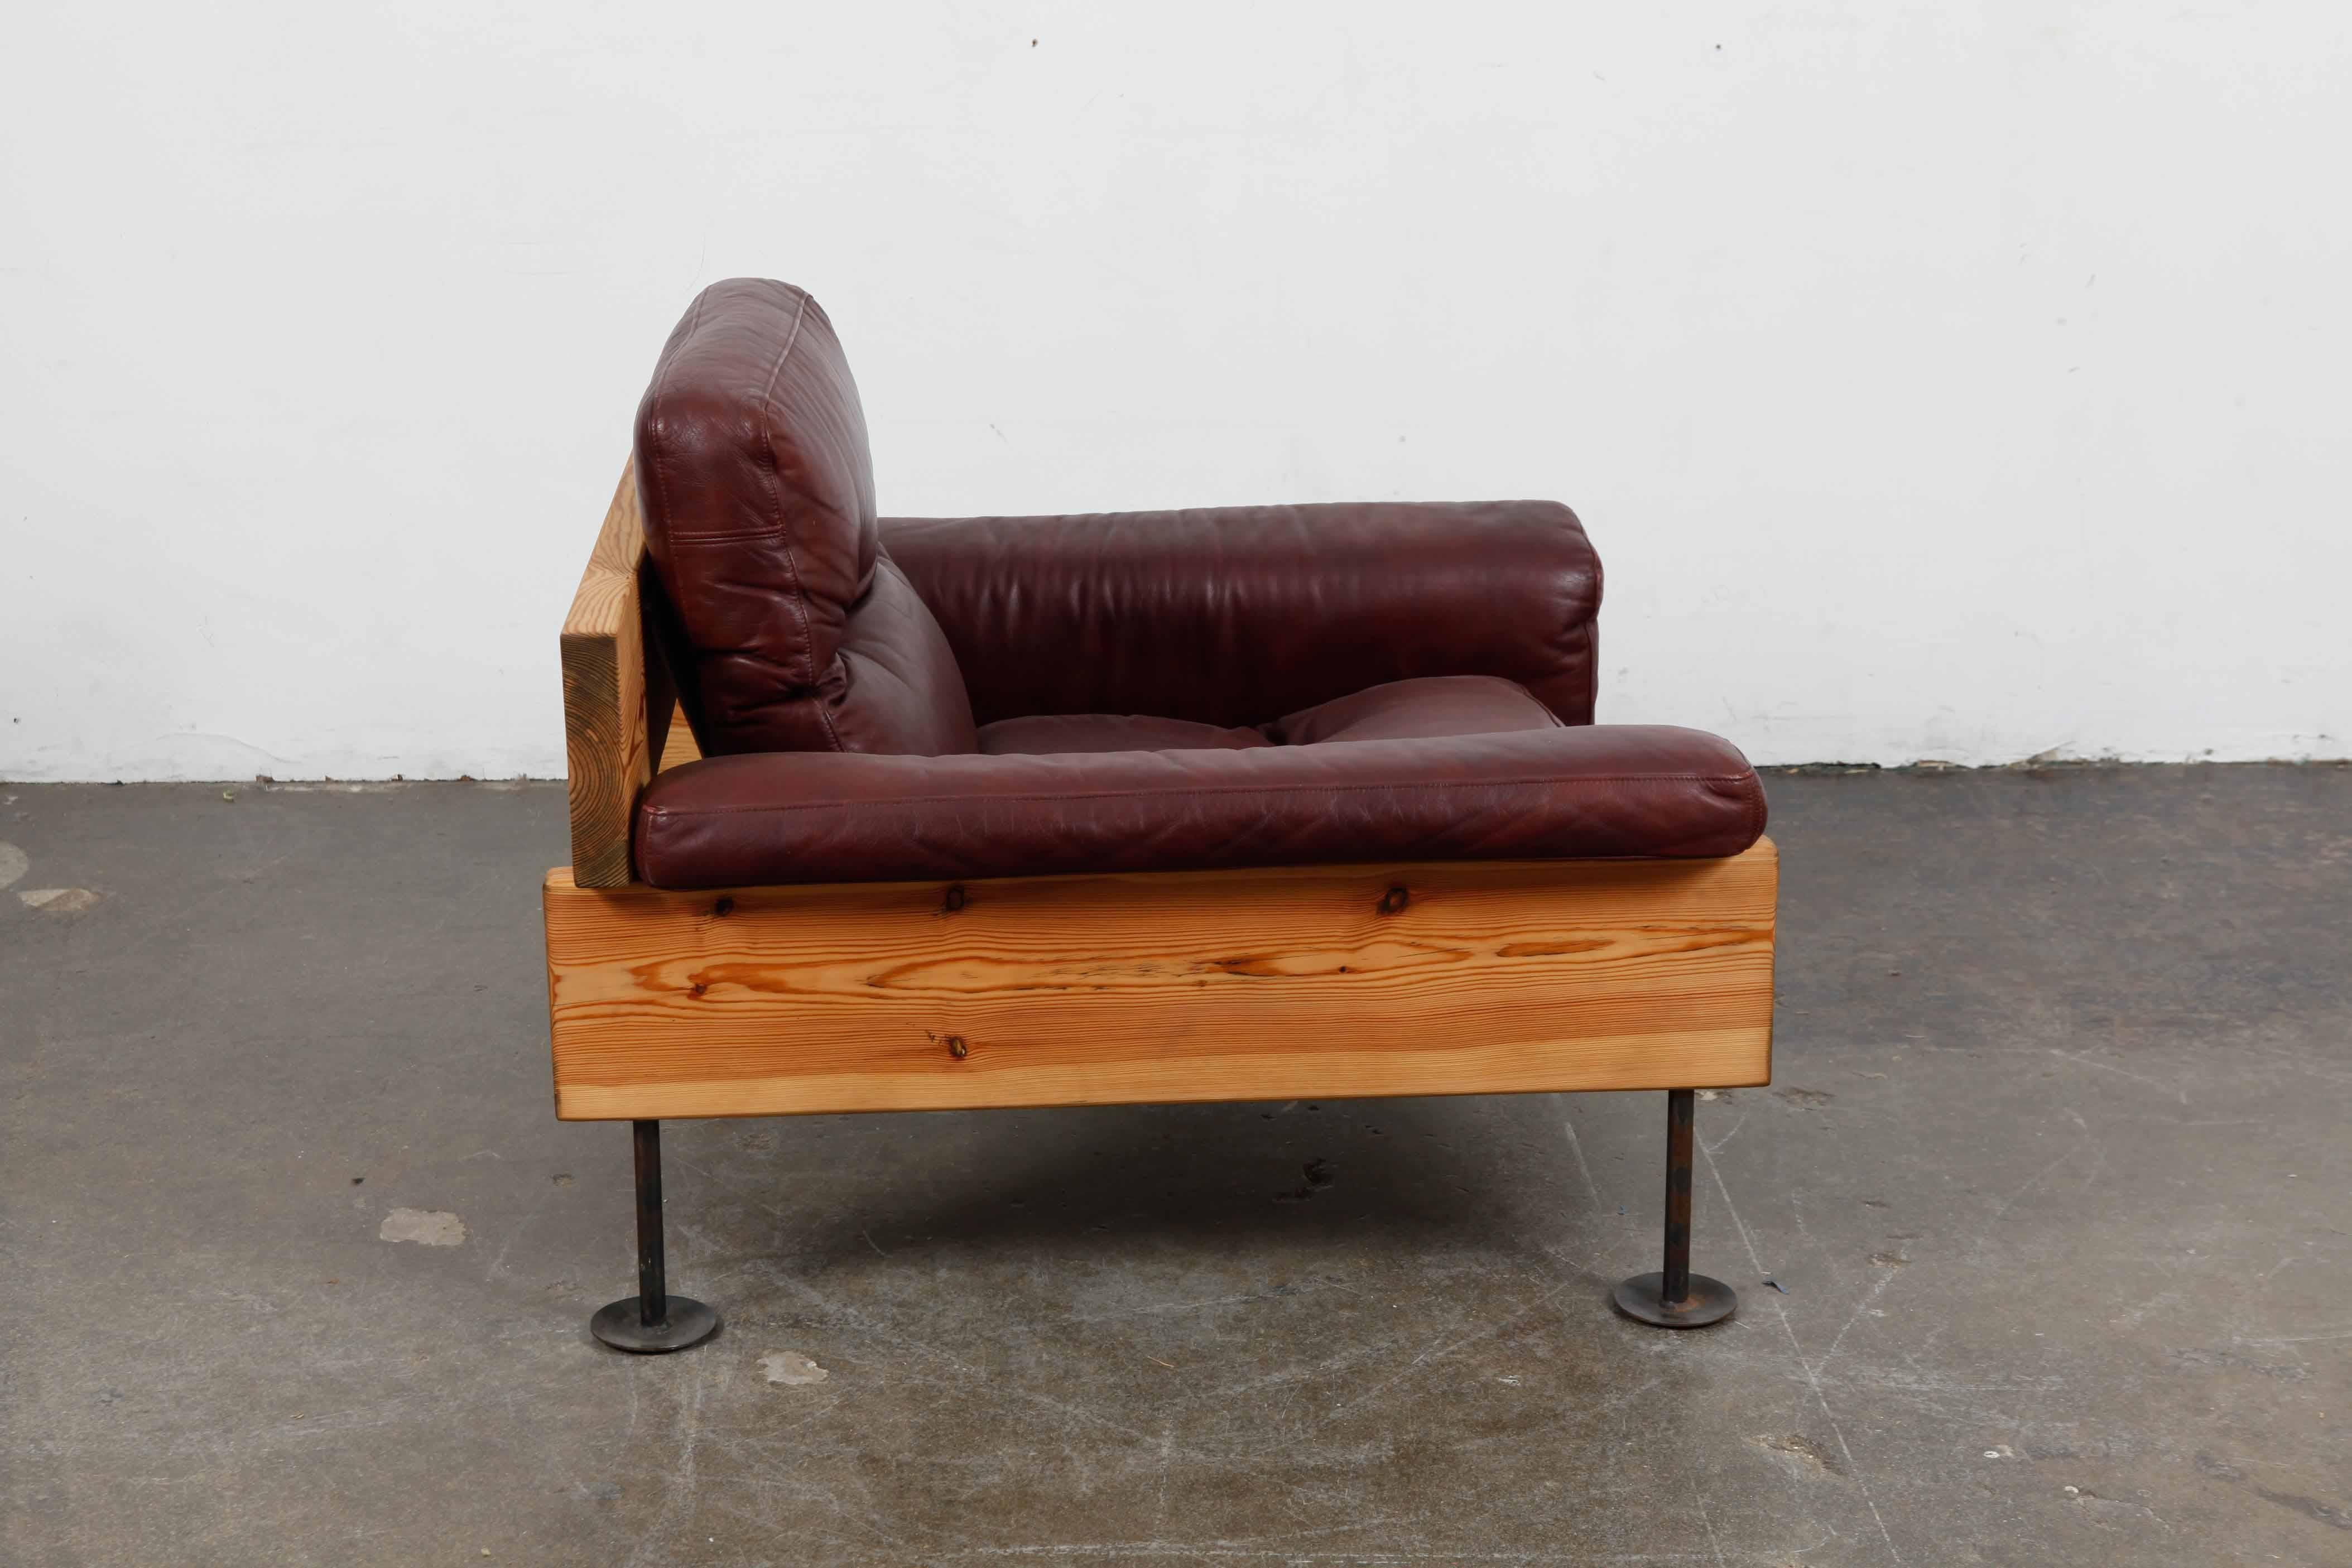 Solid pine and original oxblood leather low 1970s lounge chair with metal legs, designed by Hannu Jyräs of Finland and produced by Peem Oy.